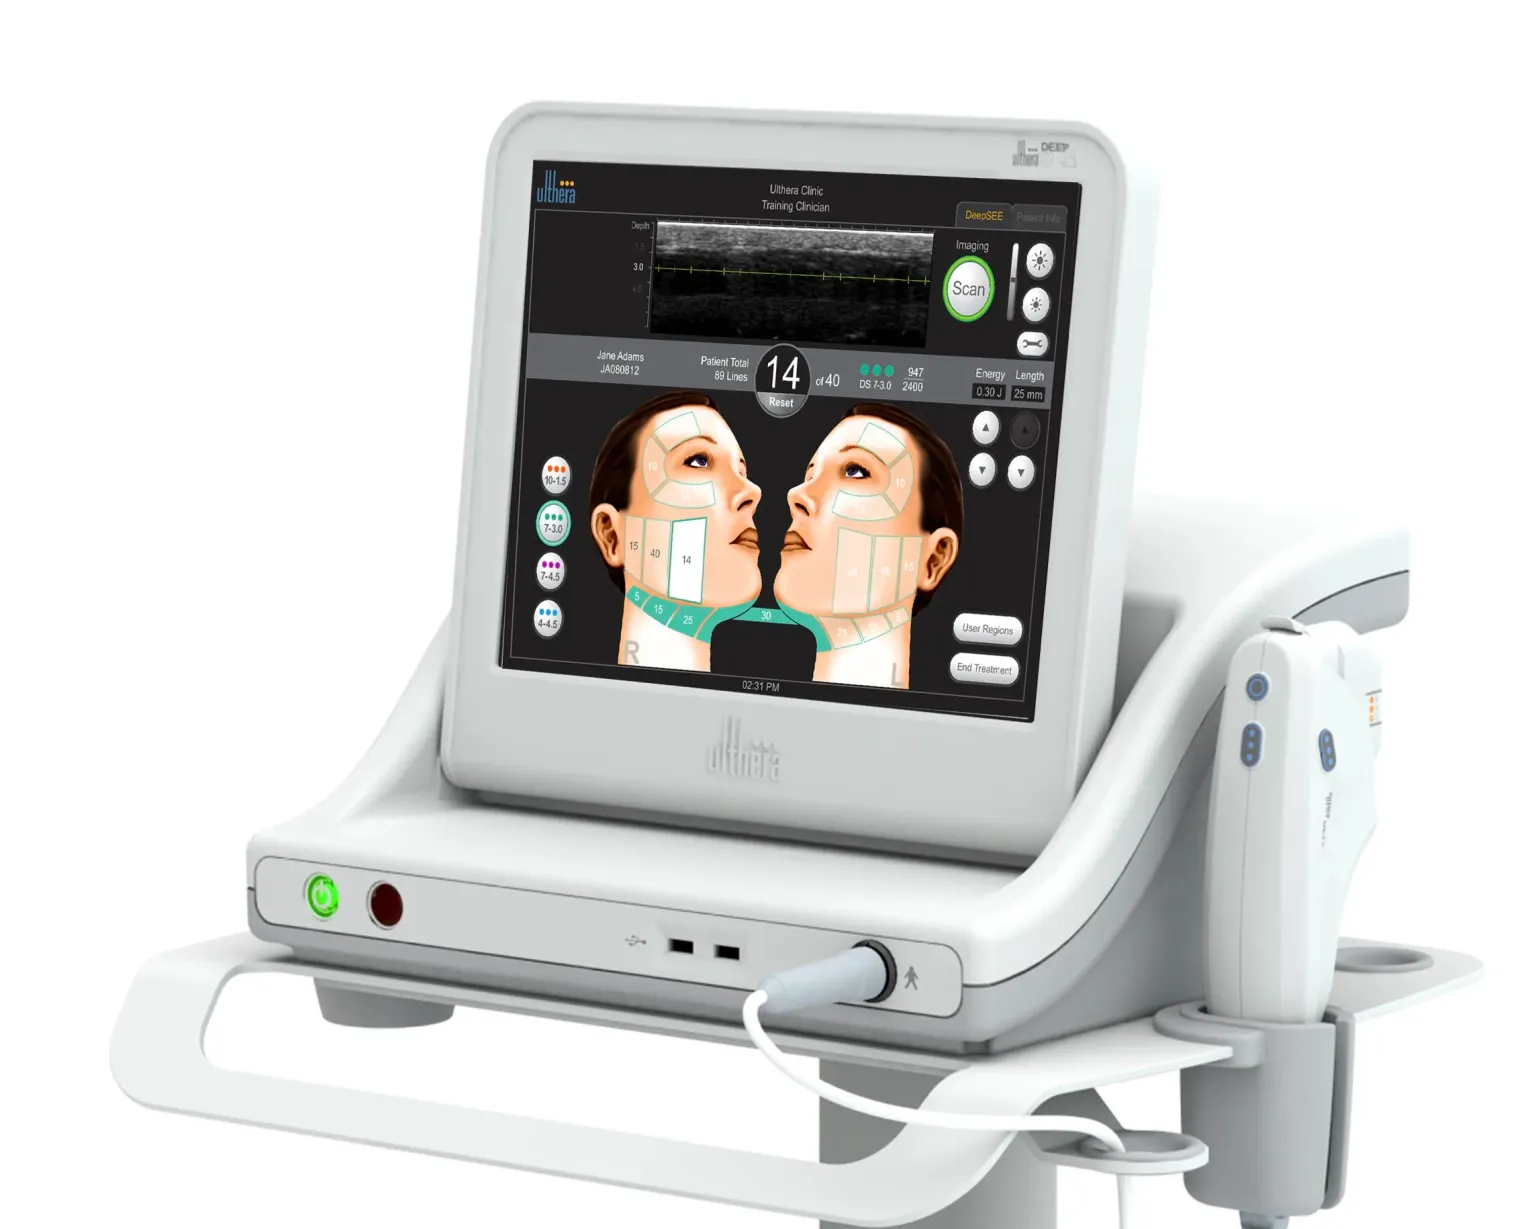 The device generates focused ultrasonic waves that can penetrate to different depths of the skin